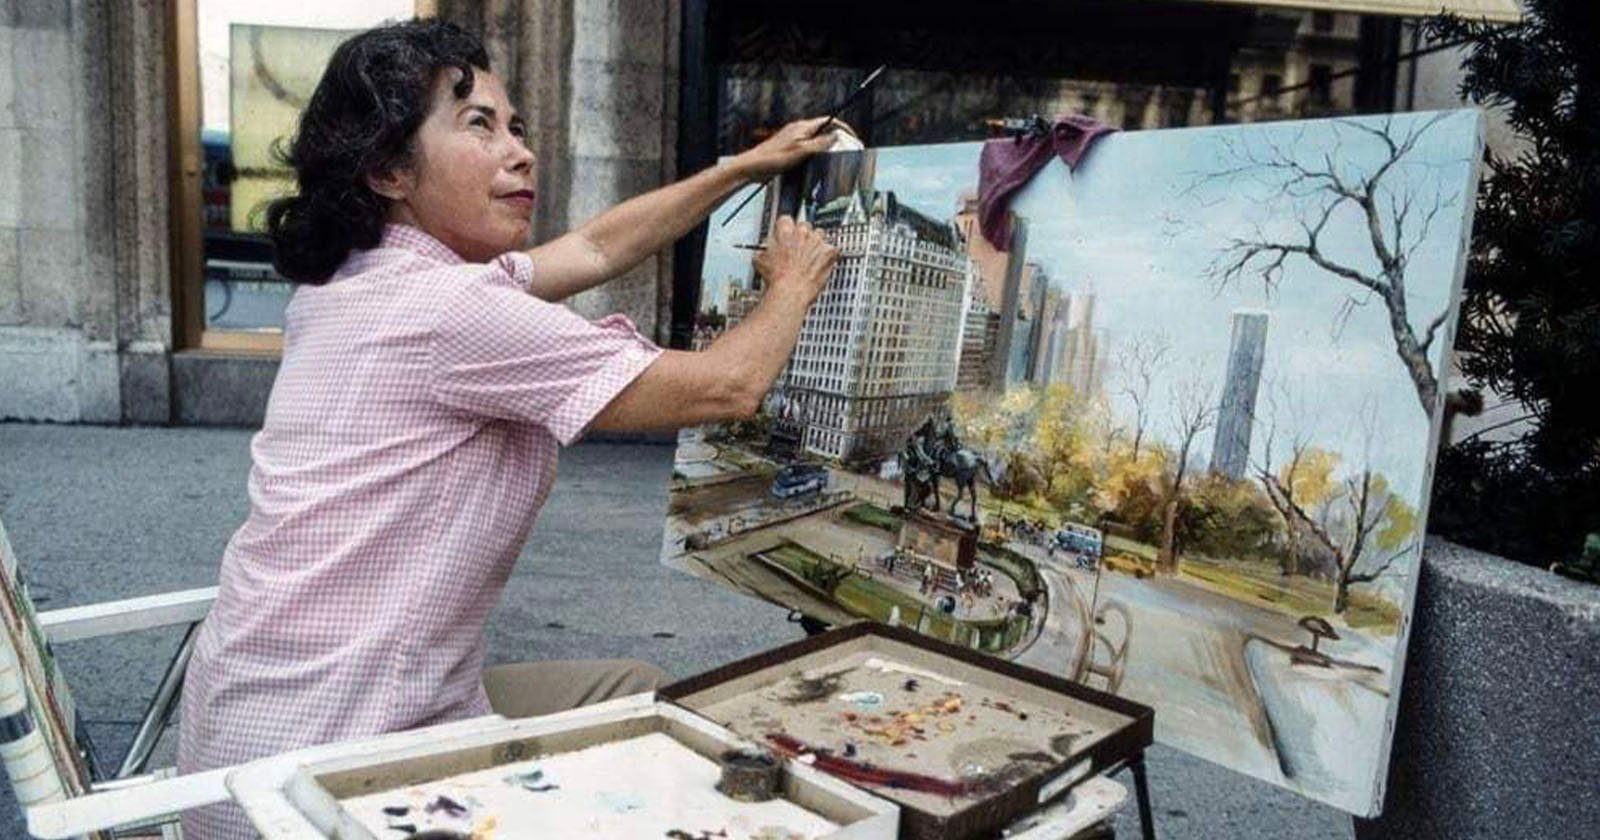 Photographer Reunited With Painter He Photographed 40 Years Ago in NY